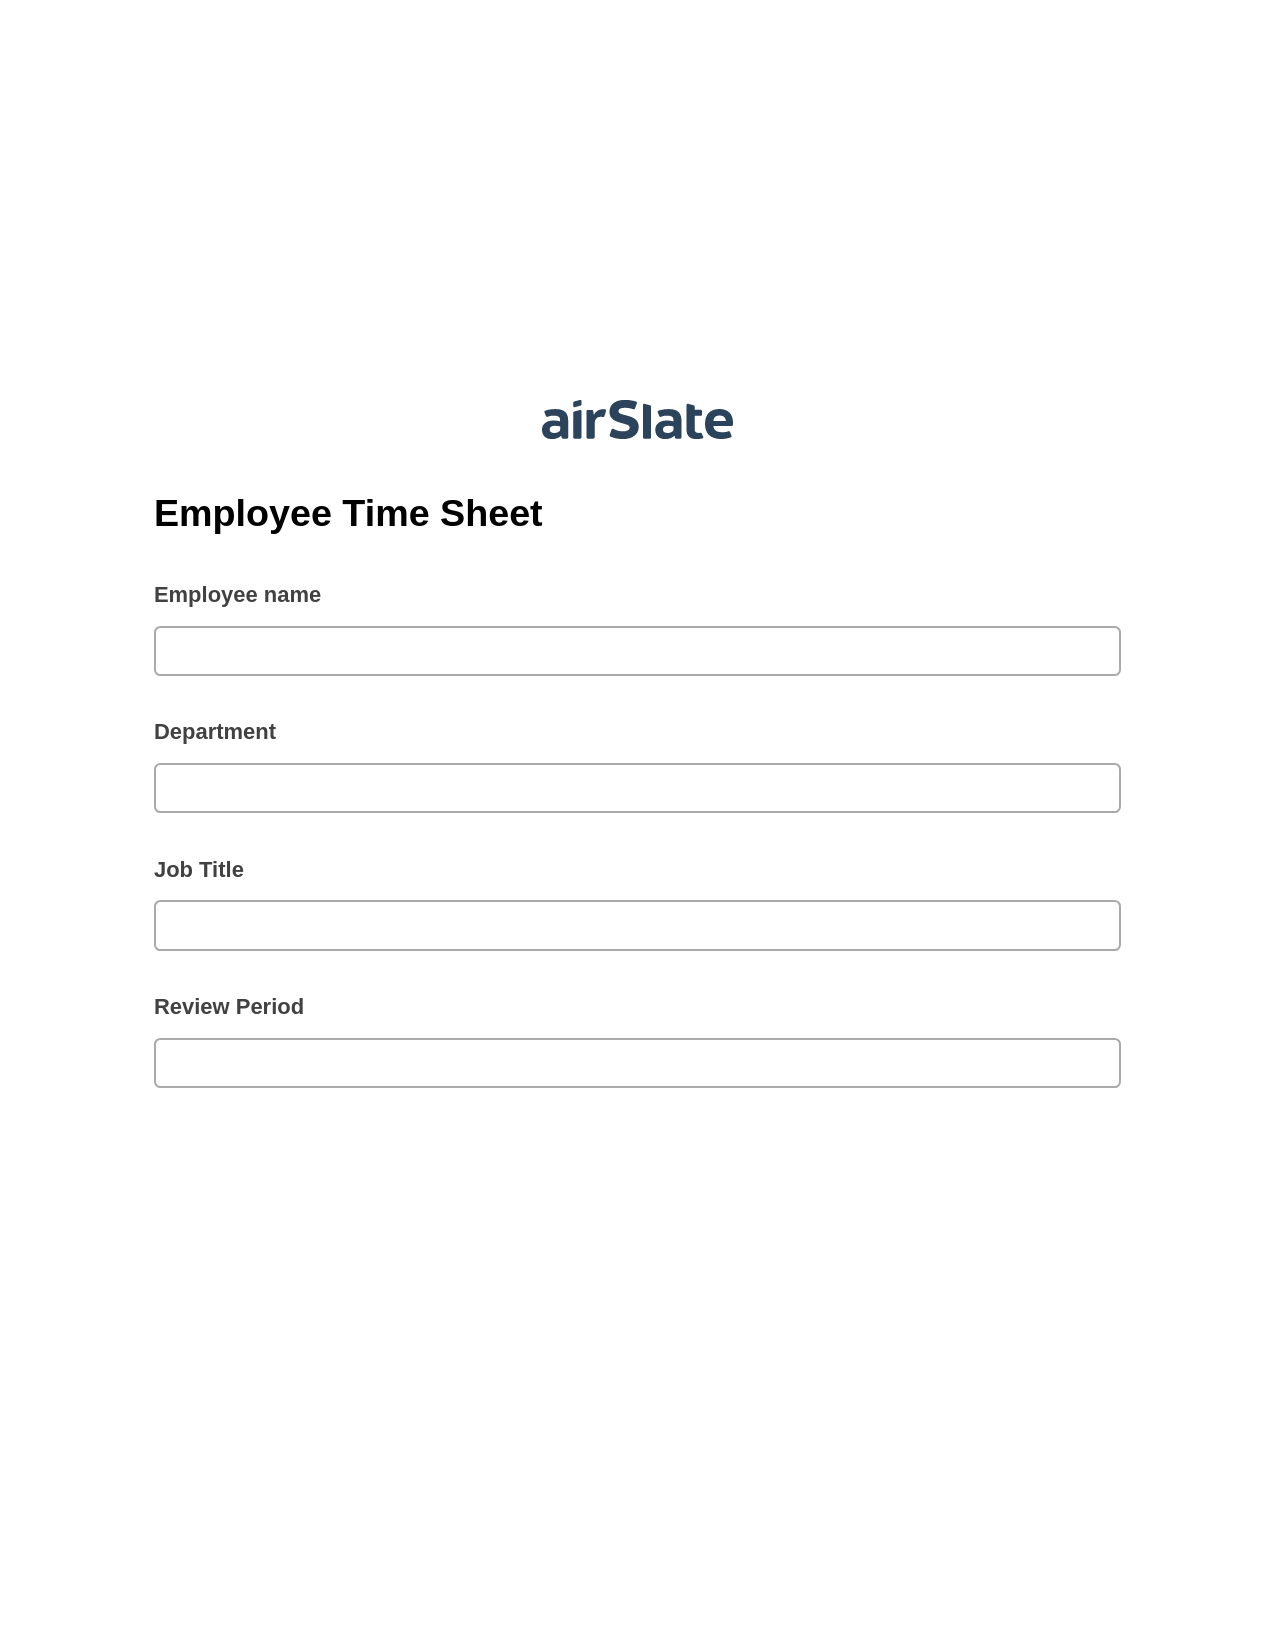 Multirole Employee Time Sheet Pre-fill from Excel Spreadsheet Bot, Email Notification Bot, Export to Google Sheet Bot